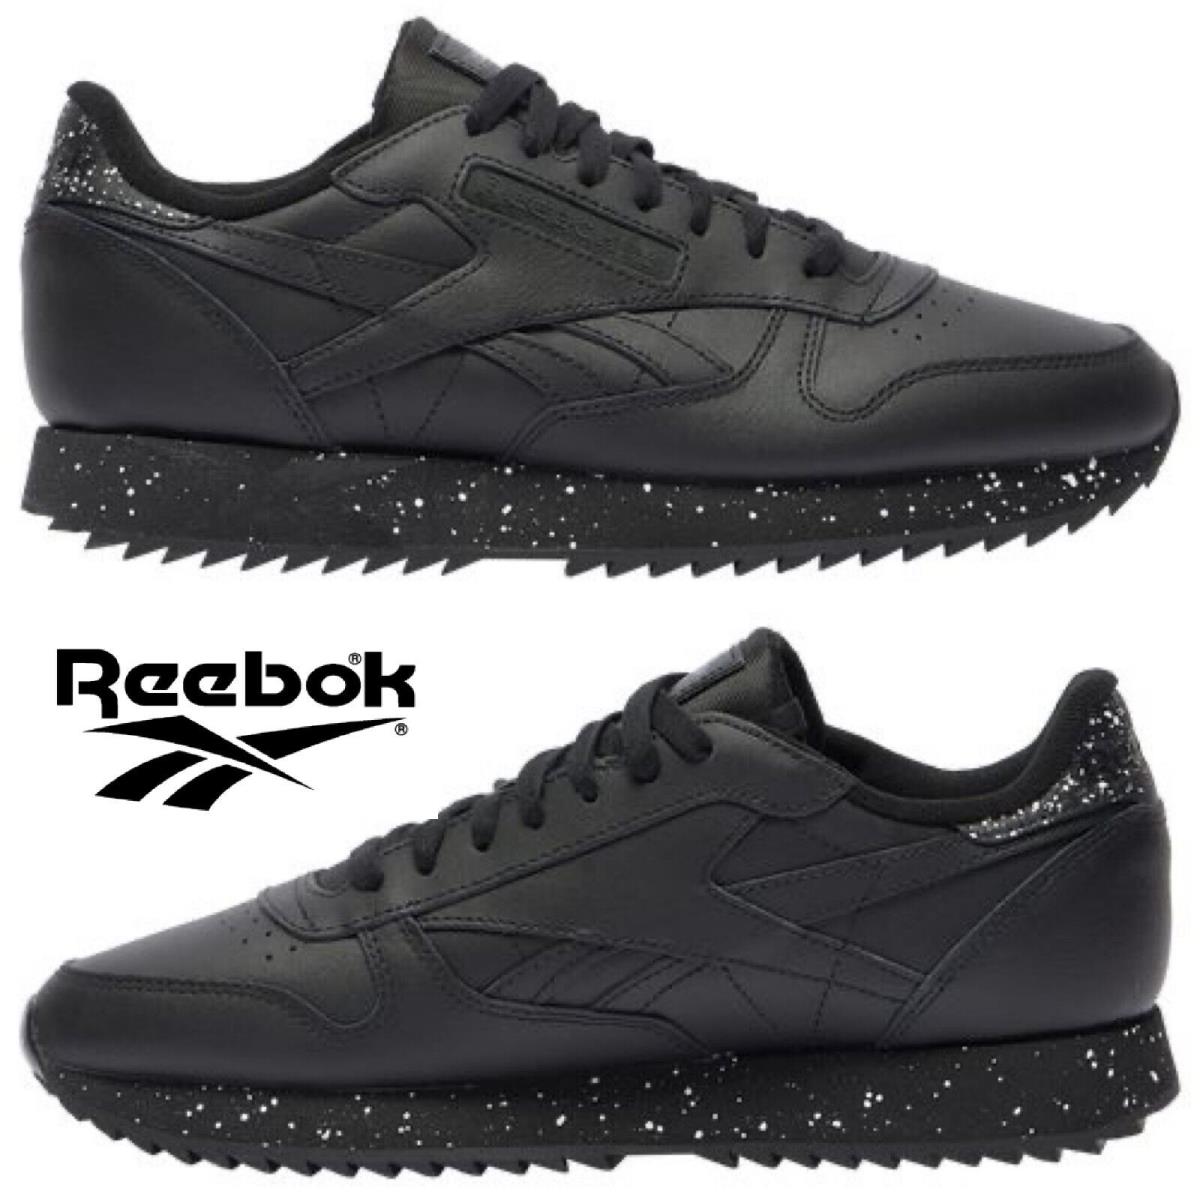 Reebok Classic Leather Men`s Sneakers Running Training Shoes Casual Sport Black - Black, Manufacturer: Black